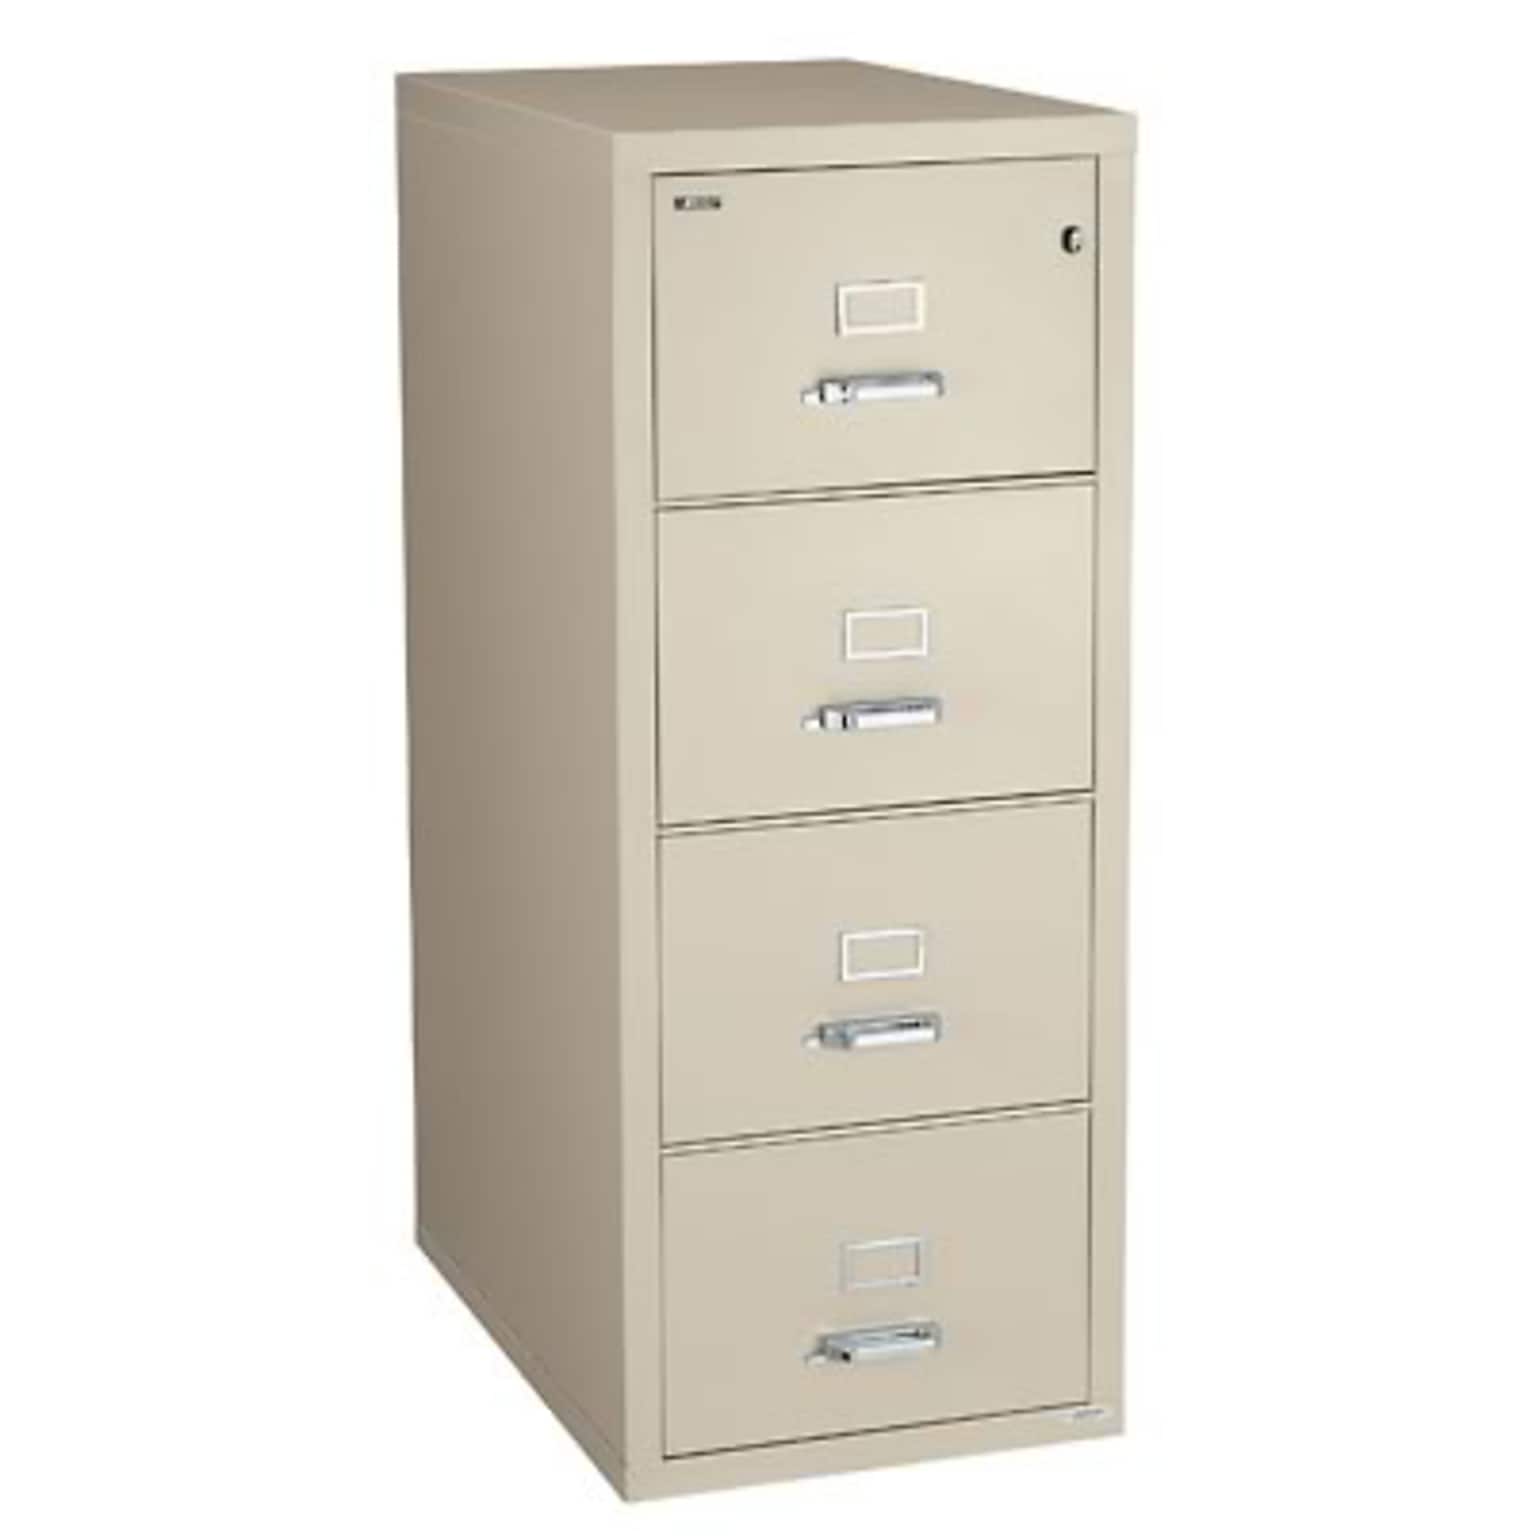 4-Drawer Fireproof Vertical File, Letter-Size, Putty (4-18-C)